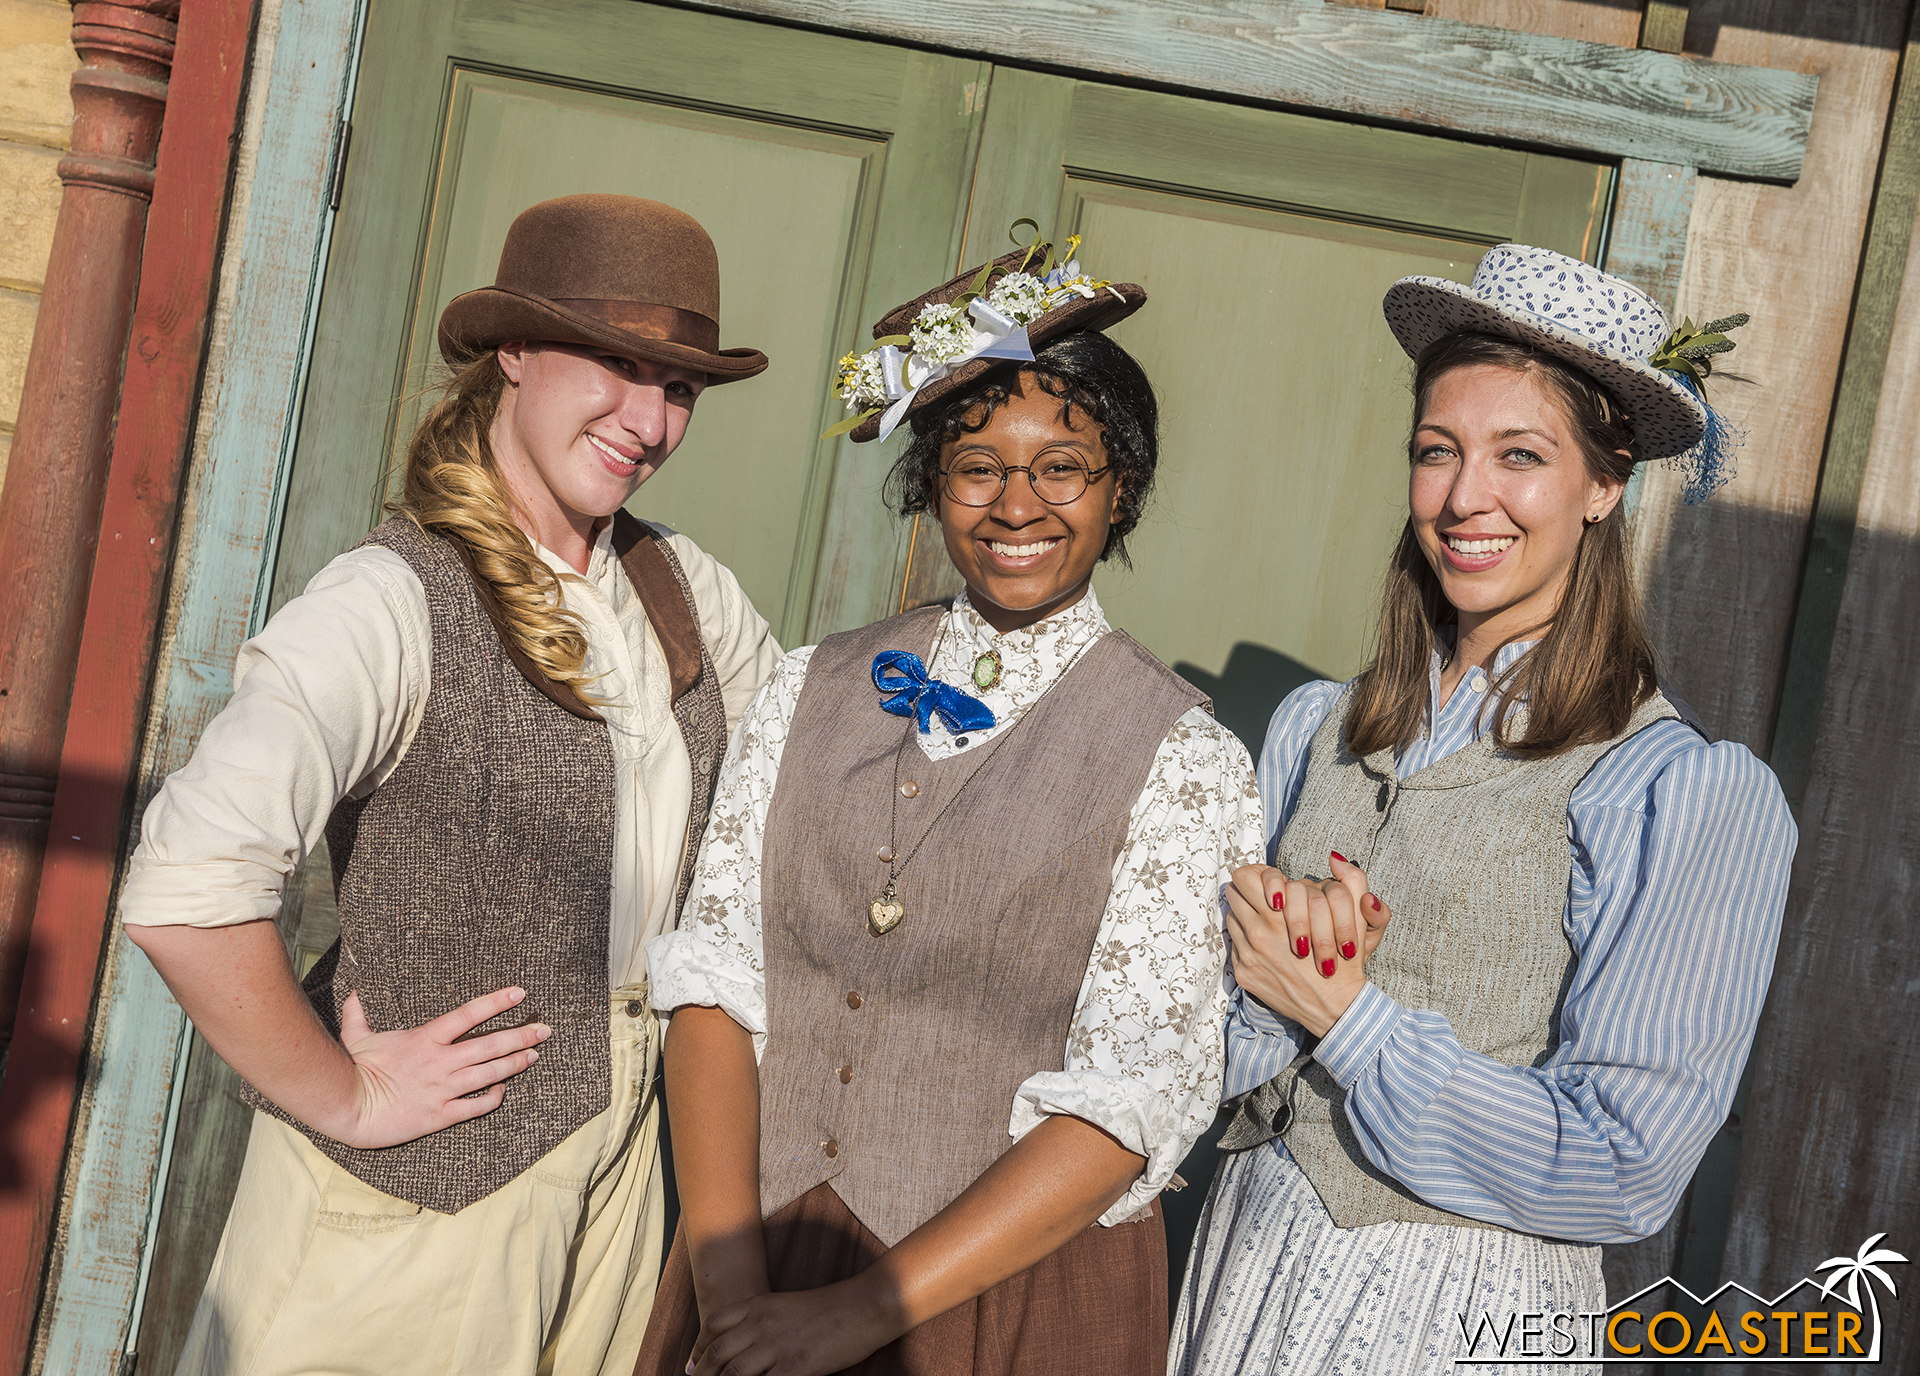  From left to right,  Calico Gazette  reporter, Izzy Malloy, schoolteacher, Marybelle Starling, and Miss Sierra pose for a photo. 